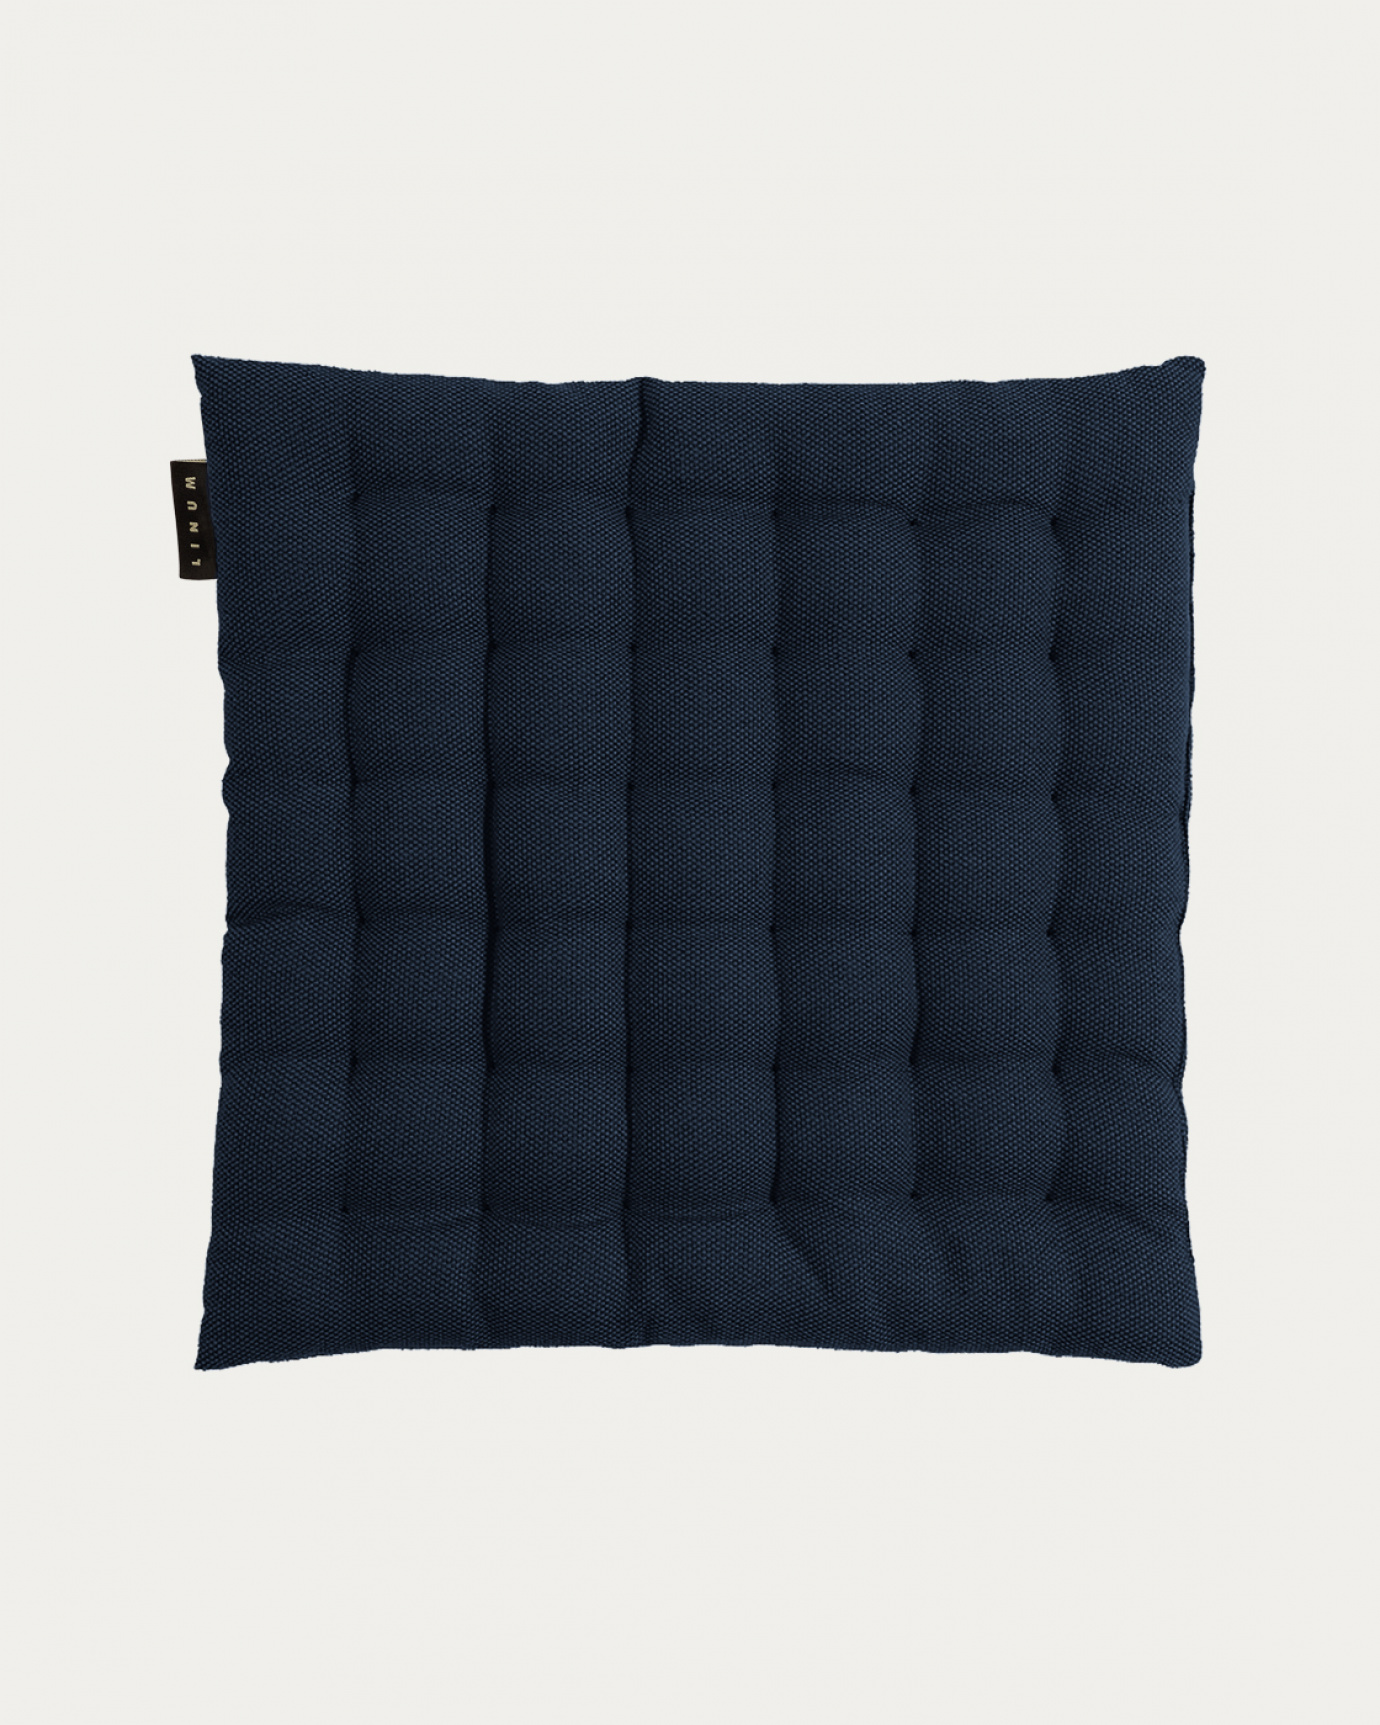 PEPPER Seat cushion 40x40 cm Dark navy blue in the group ASSORTMENT / STANDARD / Seat cushions at LINUM DESIGN (21PEP54000C16)